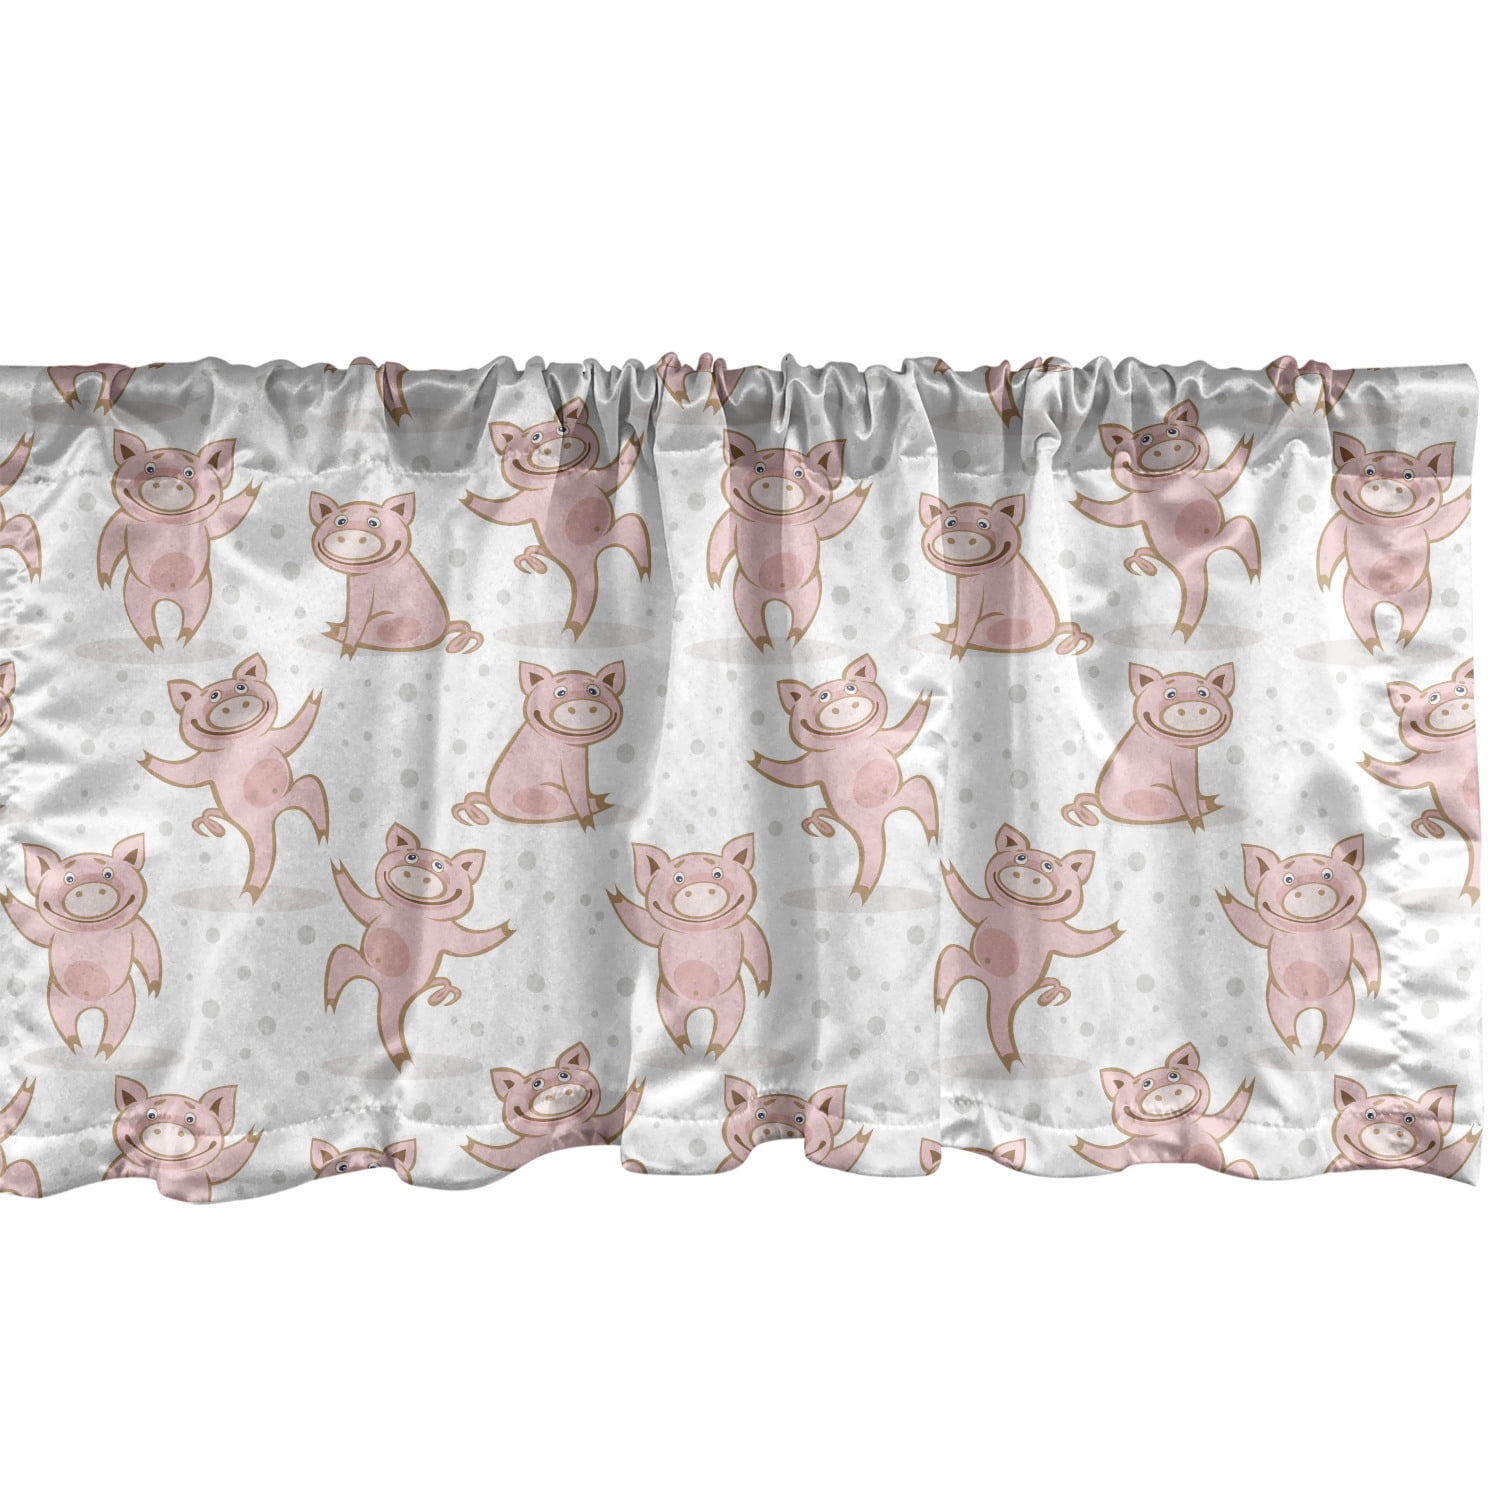 Farm Animals Cow Goat Pig Rooster White Gray Curtain Valance 